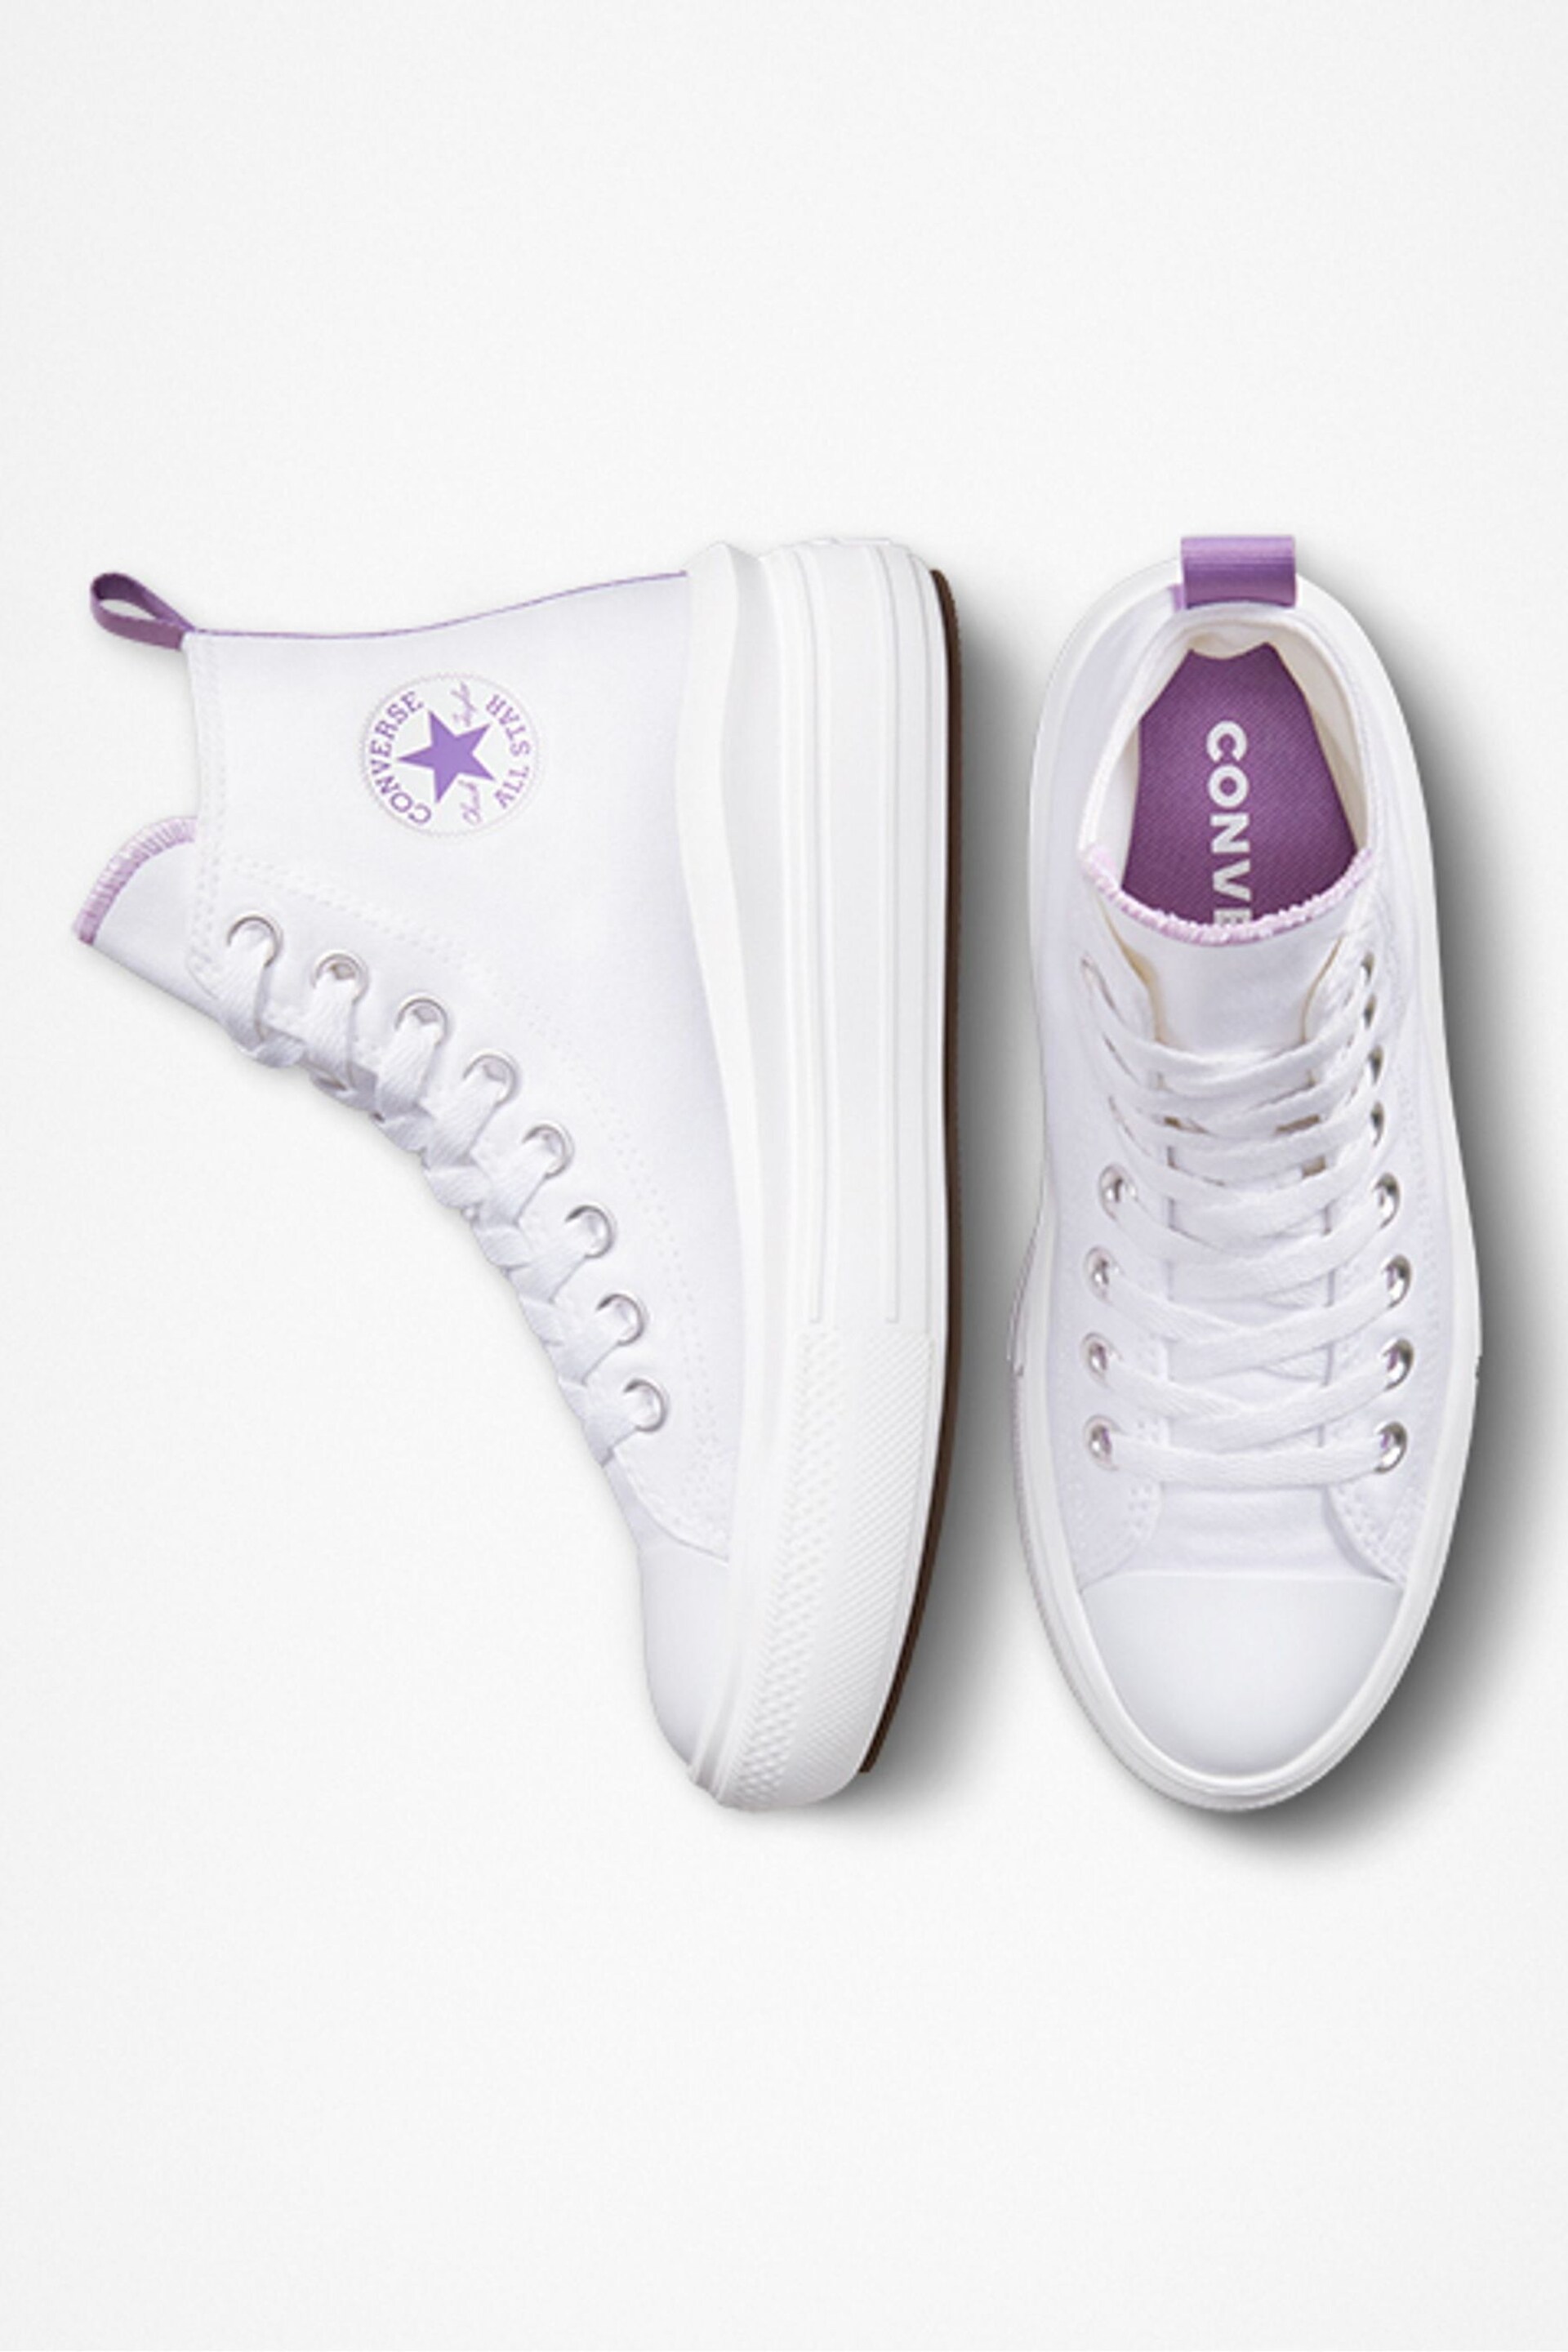 Converse White Move High Top Youth Trainers - Image 5 of 6